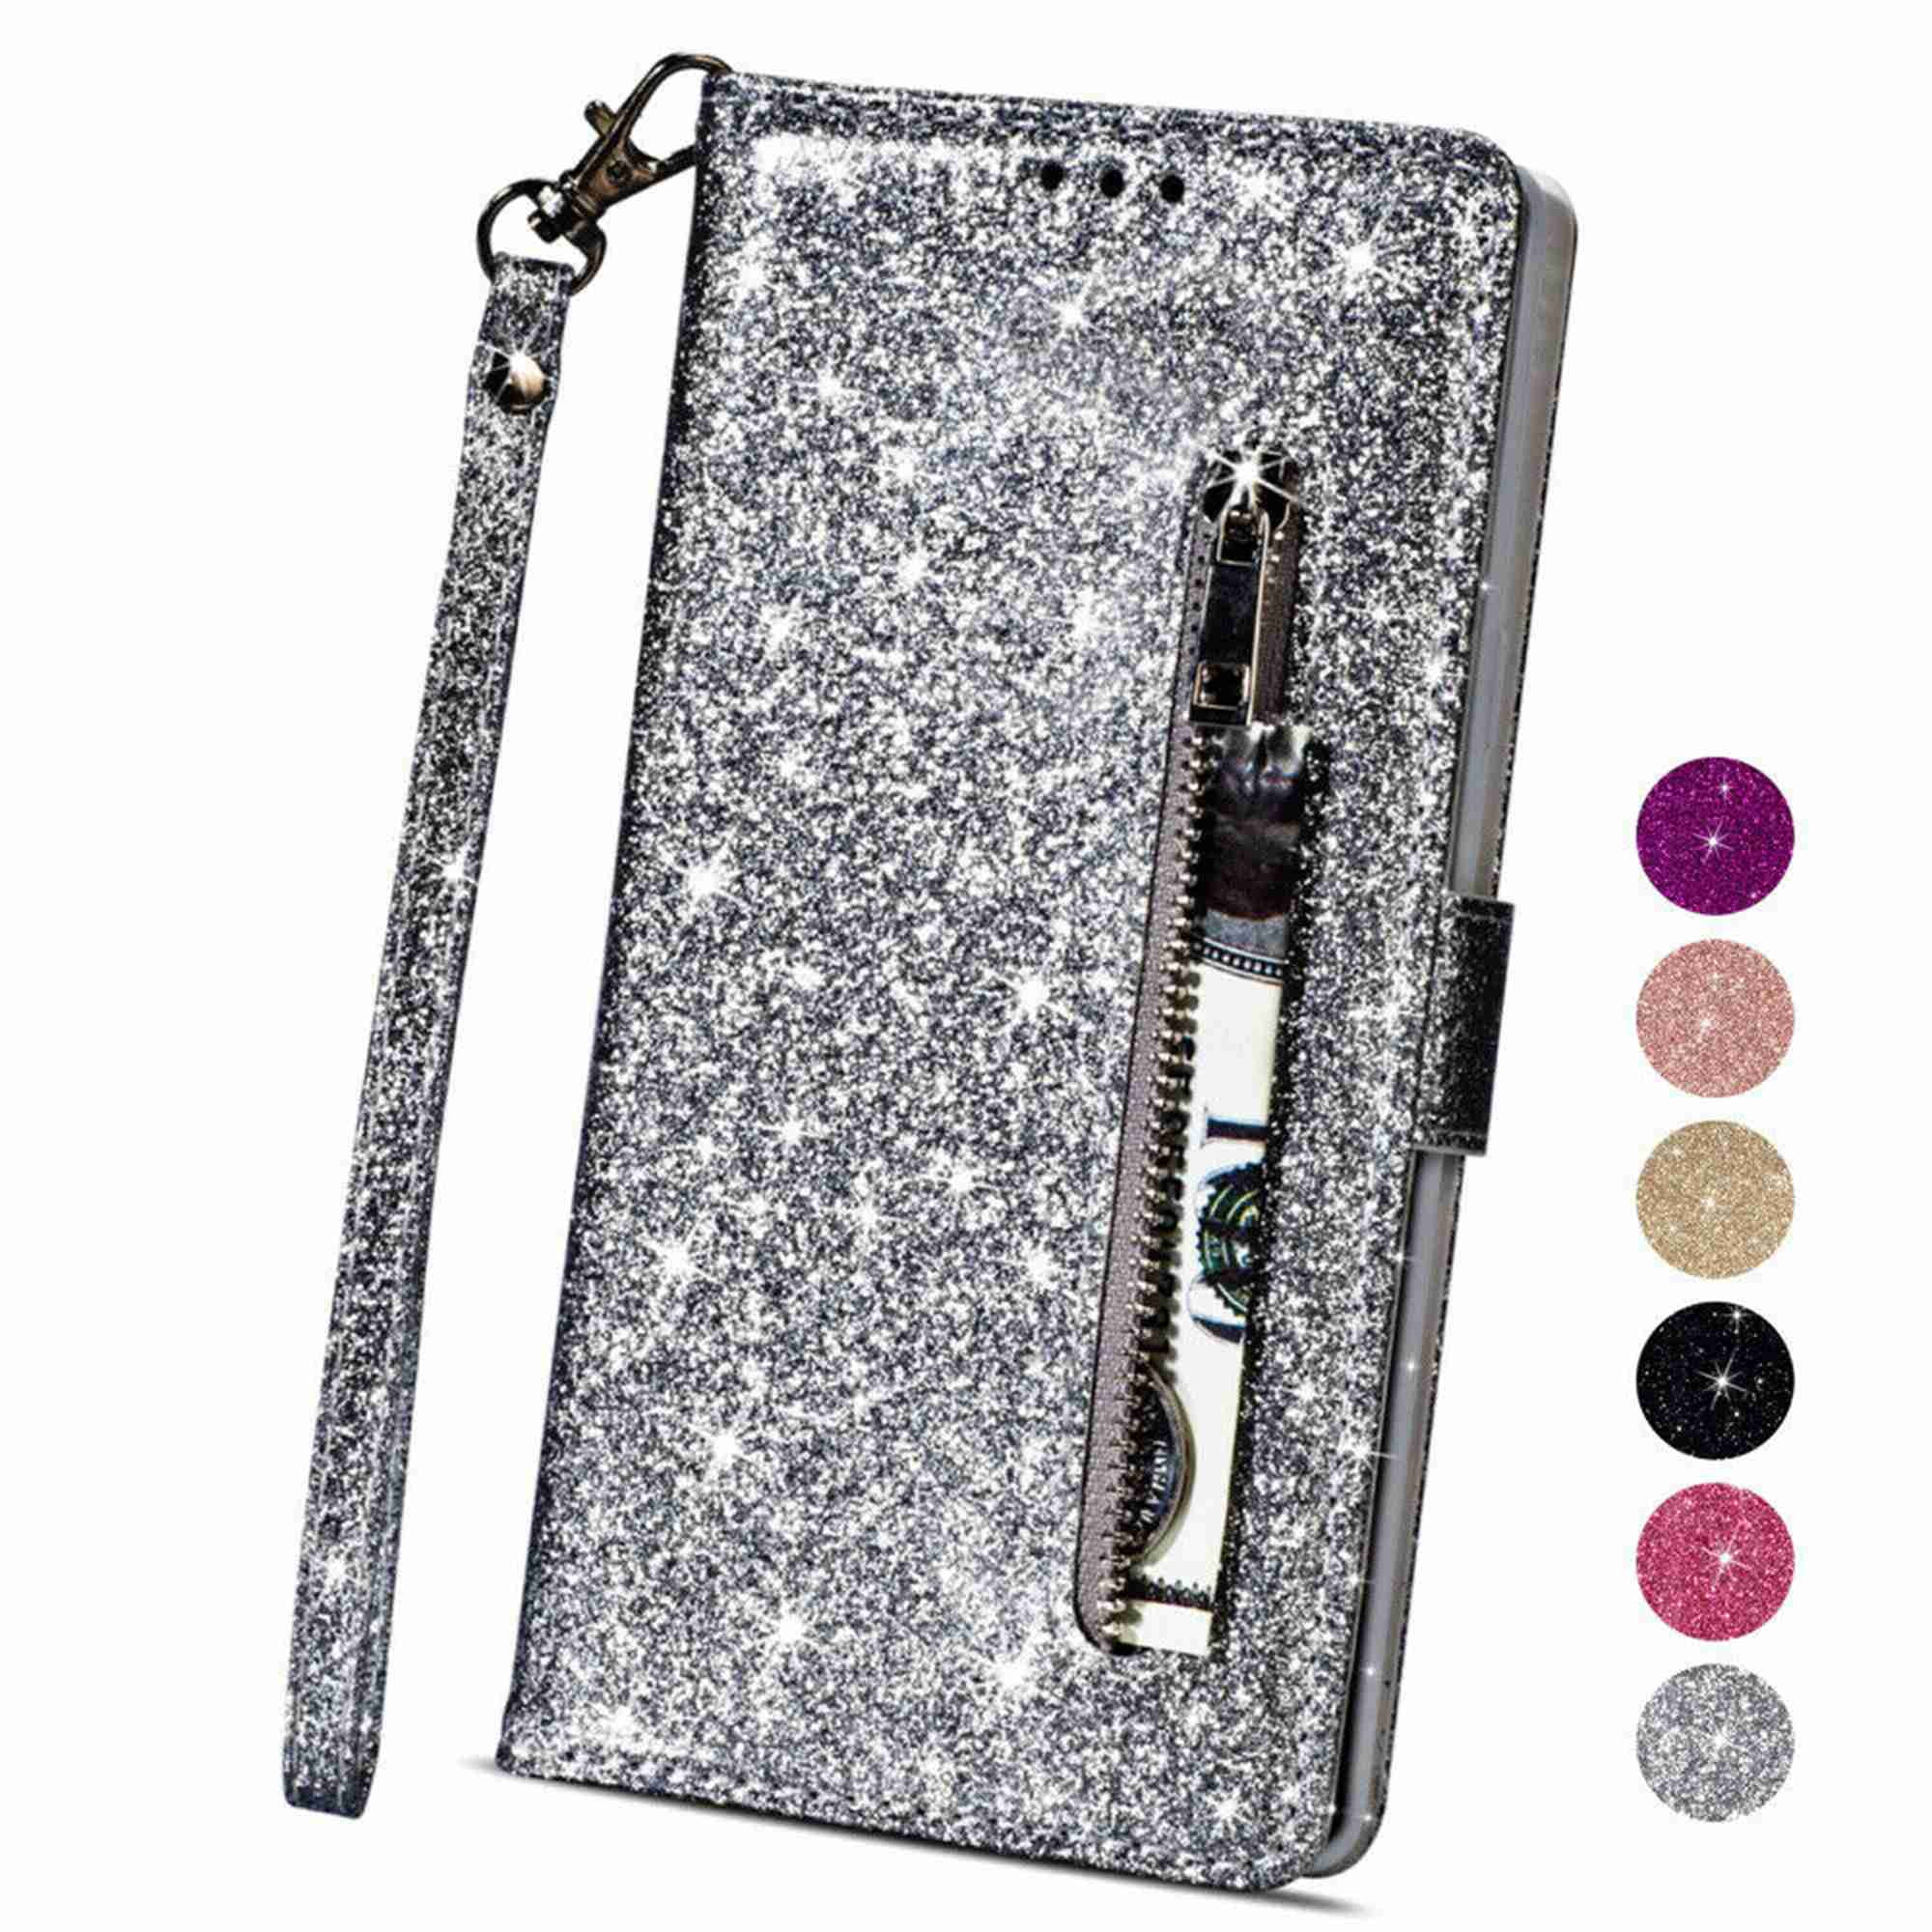 Brilliant Diamond Sparkle Bling Compatible with Samsung A40,Glitter Rhinestones Leather Stand Function Magnetic Book Purse Flip Kickstand Wallet with Card Slot Holder Protective Cover 